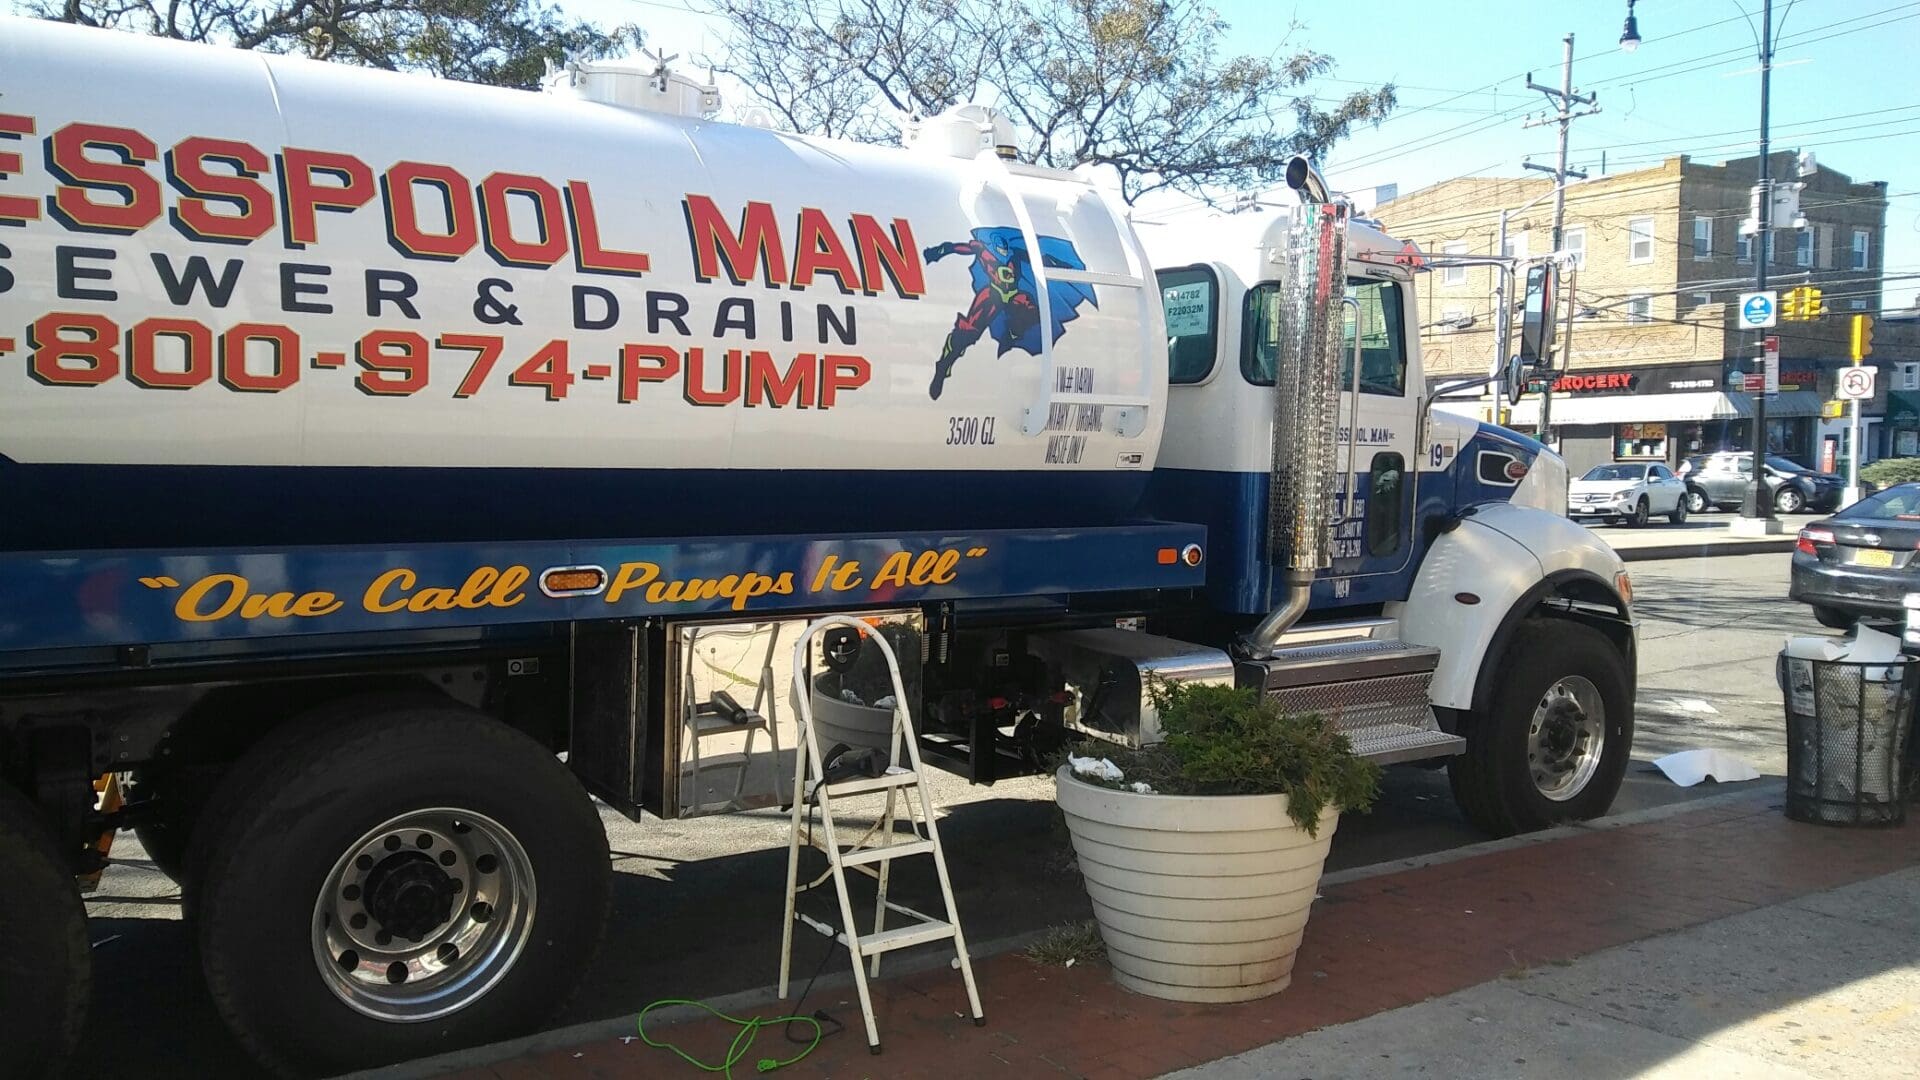 A large sewer and drain service truck parked on a sunny street, featuring bold text and a graphic of a superhero plumber from ADP USA Solutions Gallery.